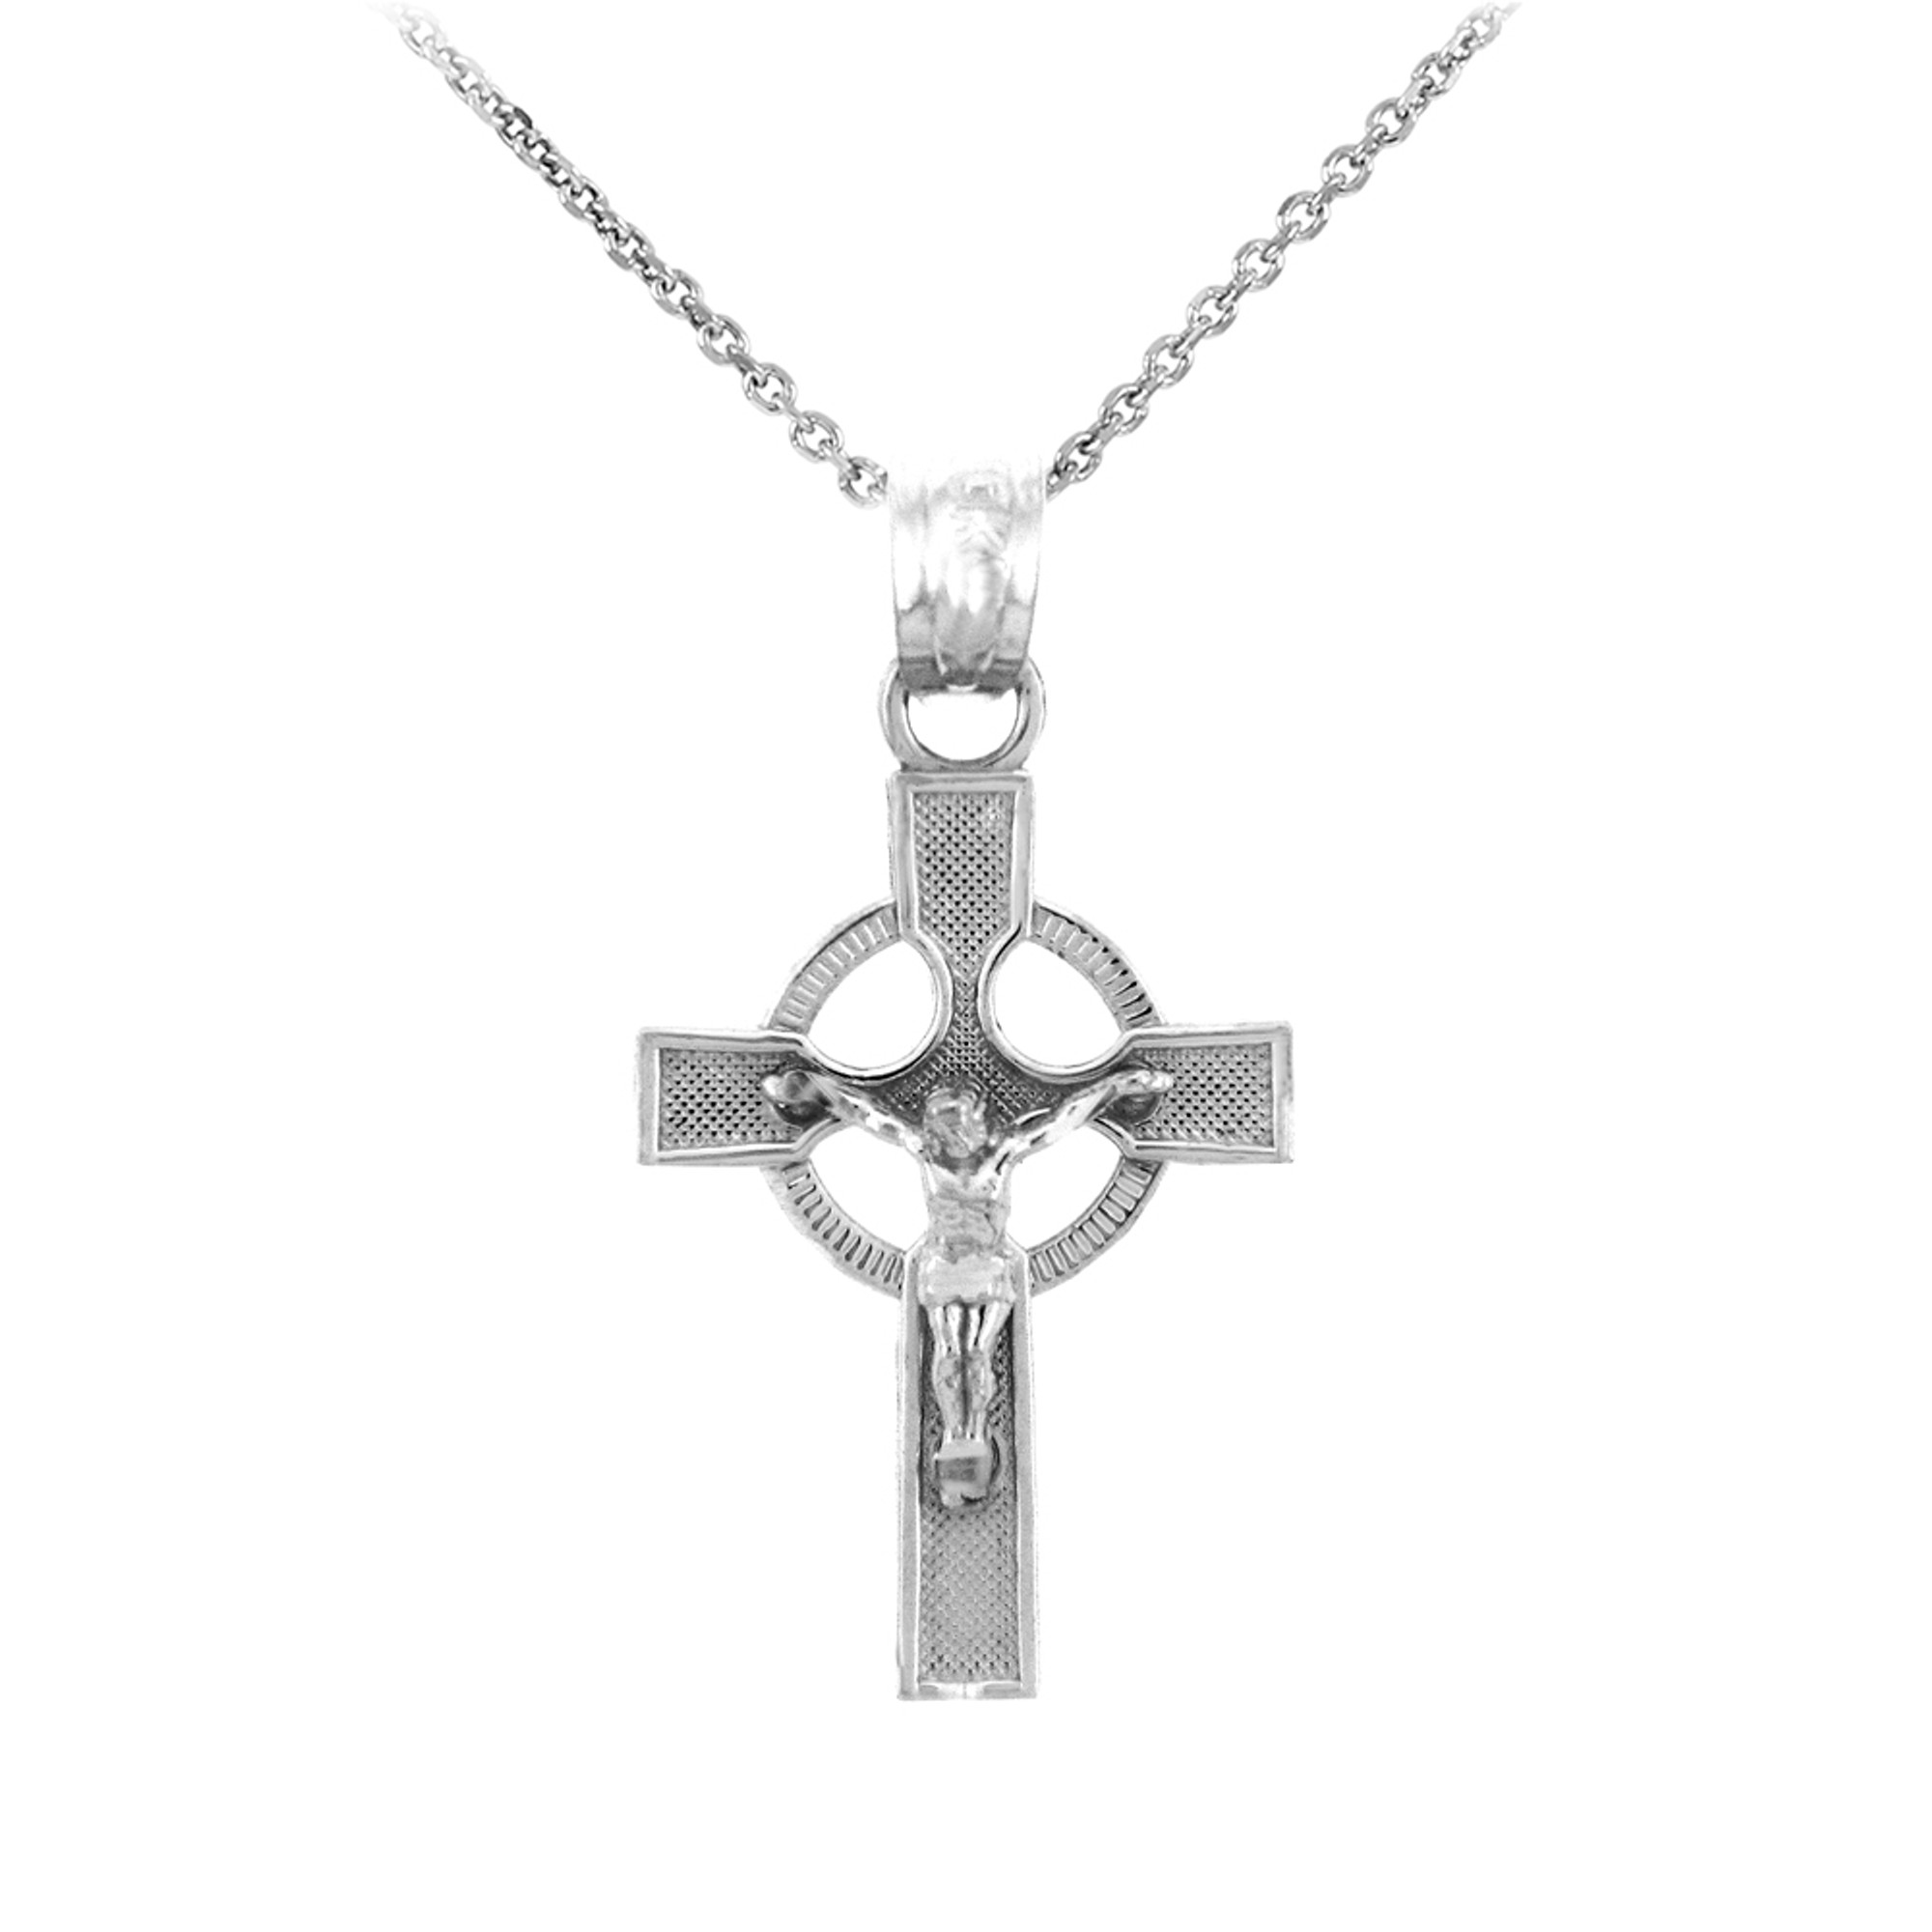 Sterling Silver Crucifix Pendant Necklace- The Infinity Crucifix